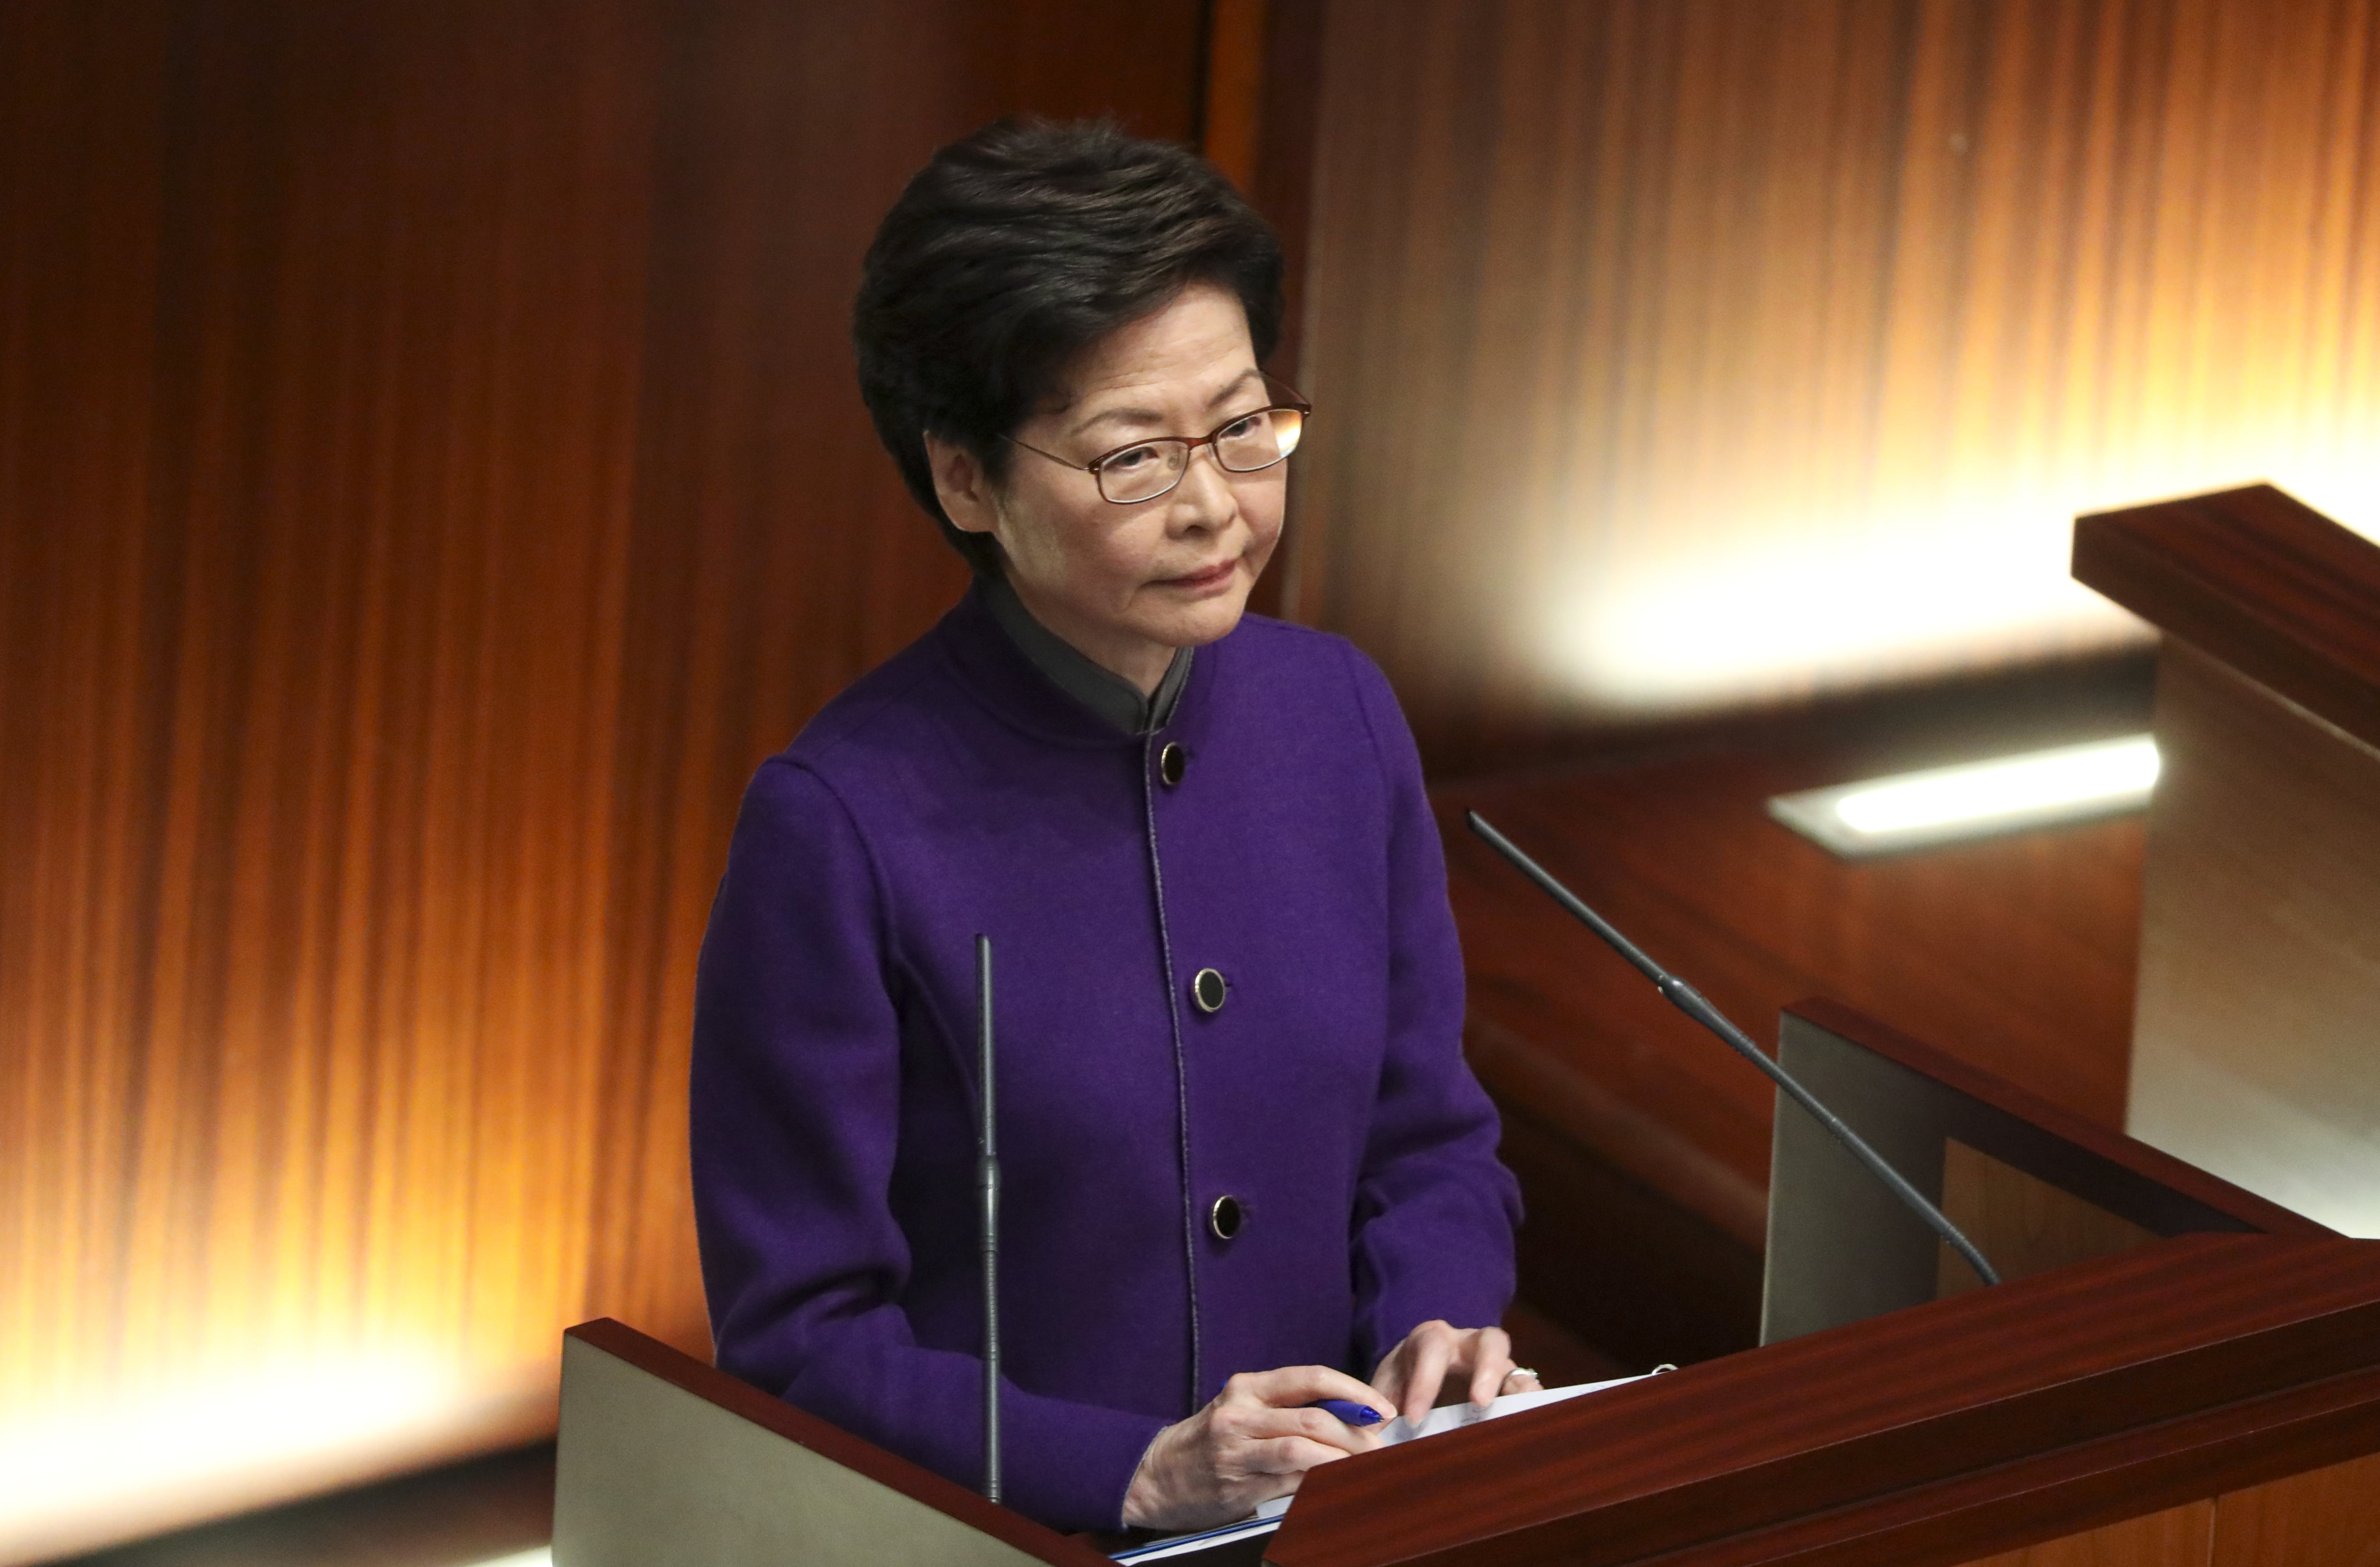 Chief Executive Carrie Lam attends the Legco question and answer session on Wednesday. Photo: Sam Tsang